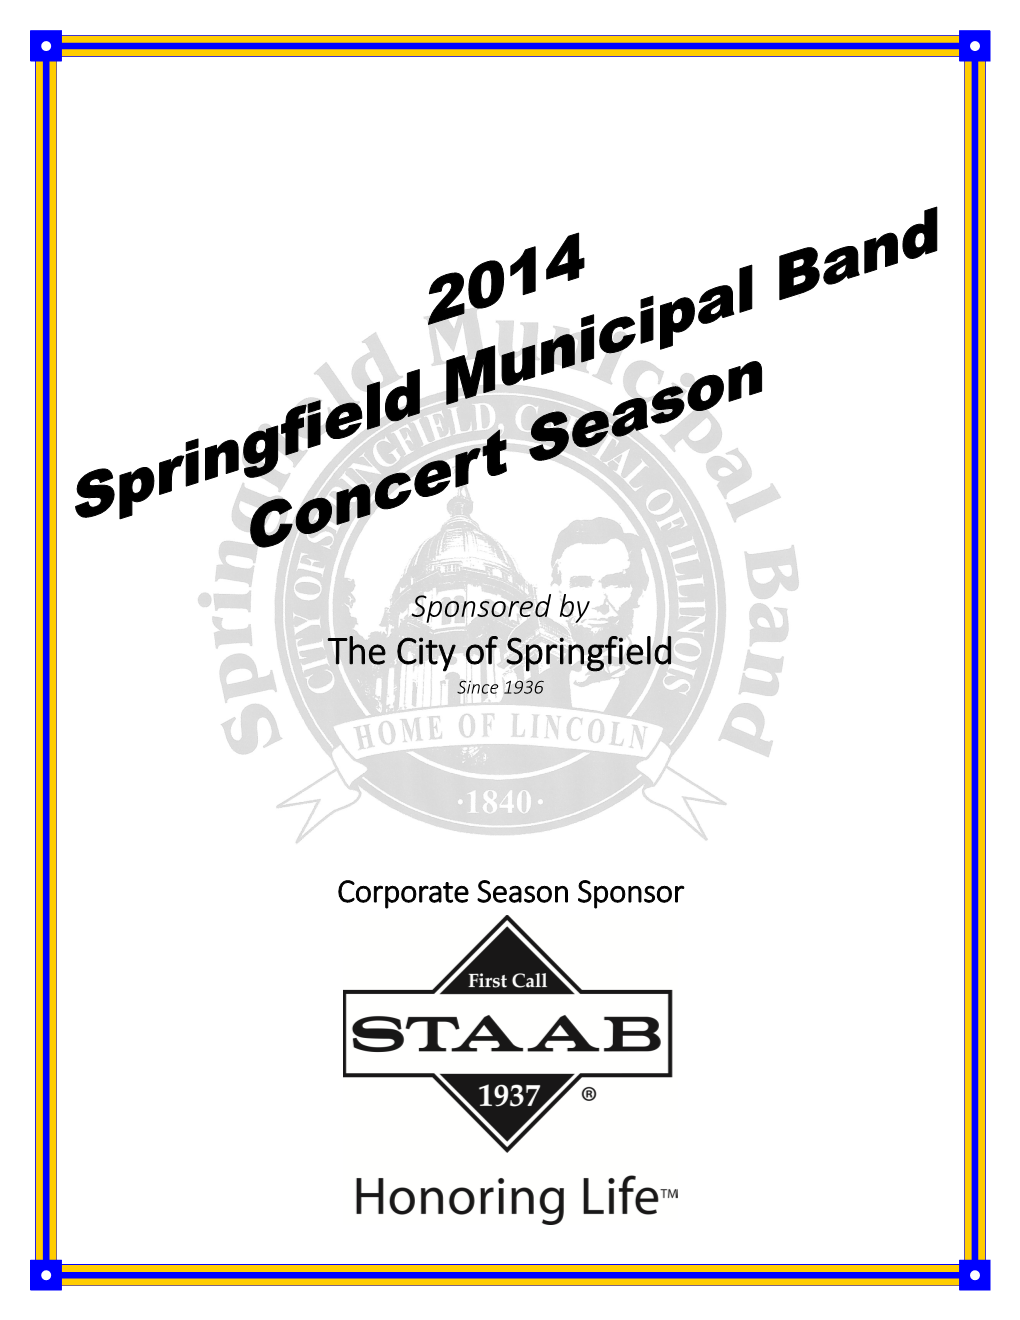 The City of Springfield Since 1936